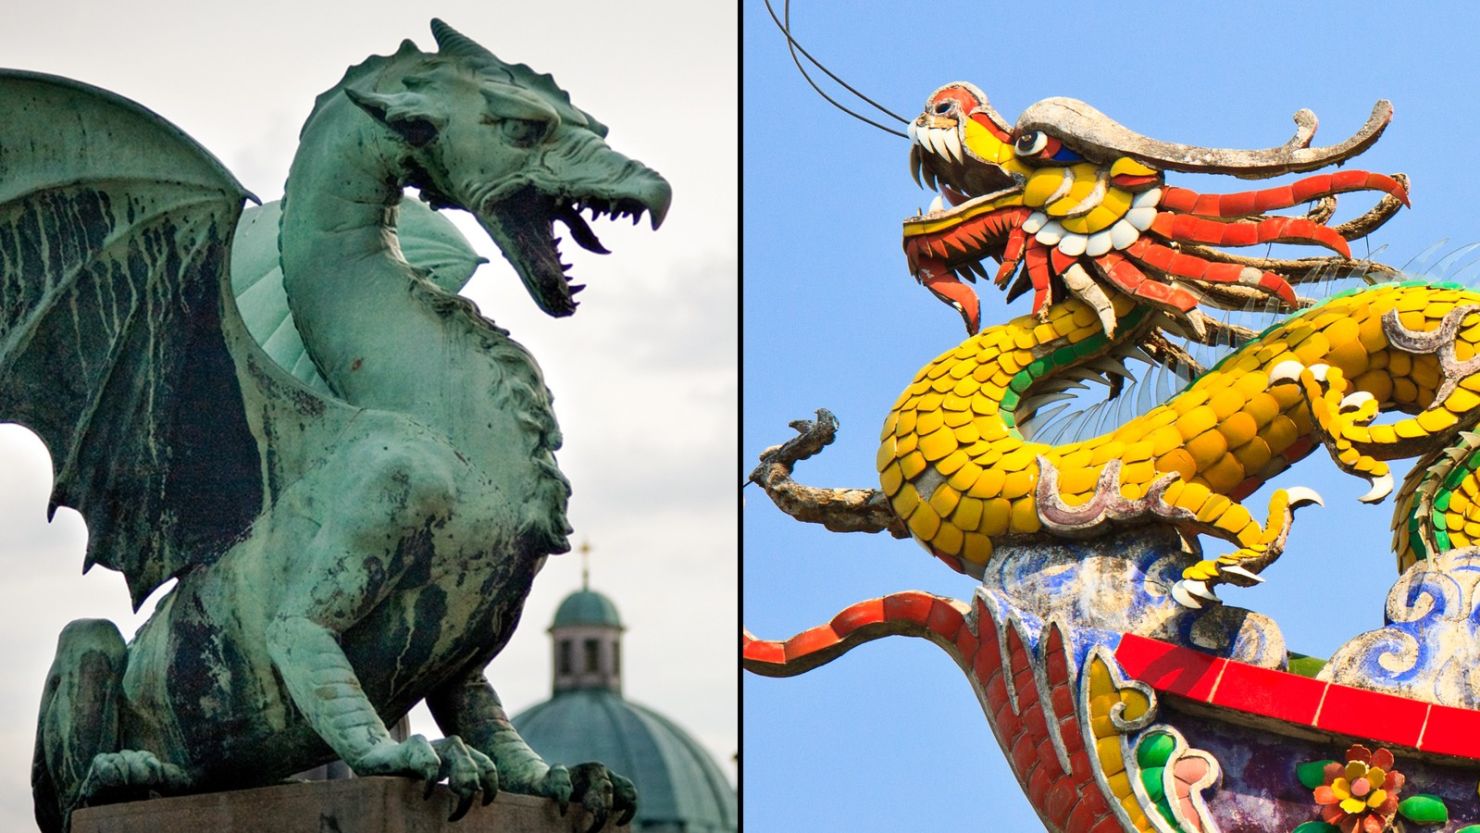 A dragon statue in Ljubljana, Slovenia, (left) and a golden Chinese dragon, or loong. The former was first portrayed a monster but was transformed into a symbolic protector of the city.